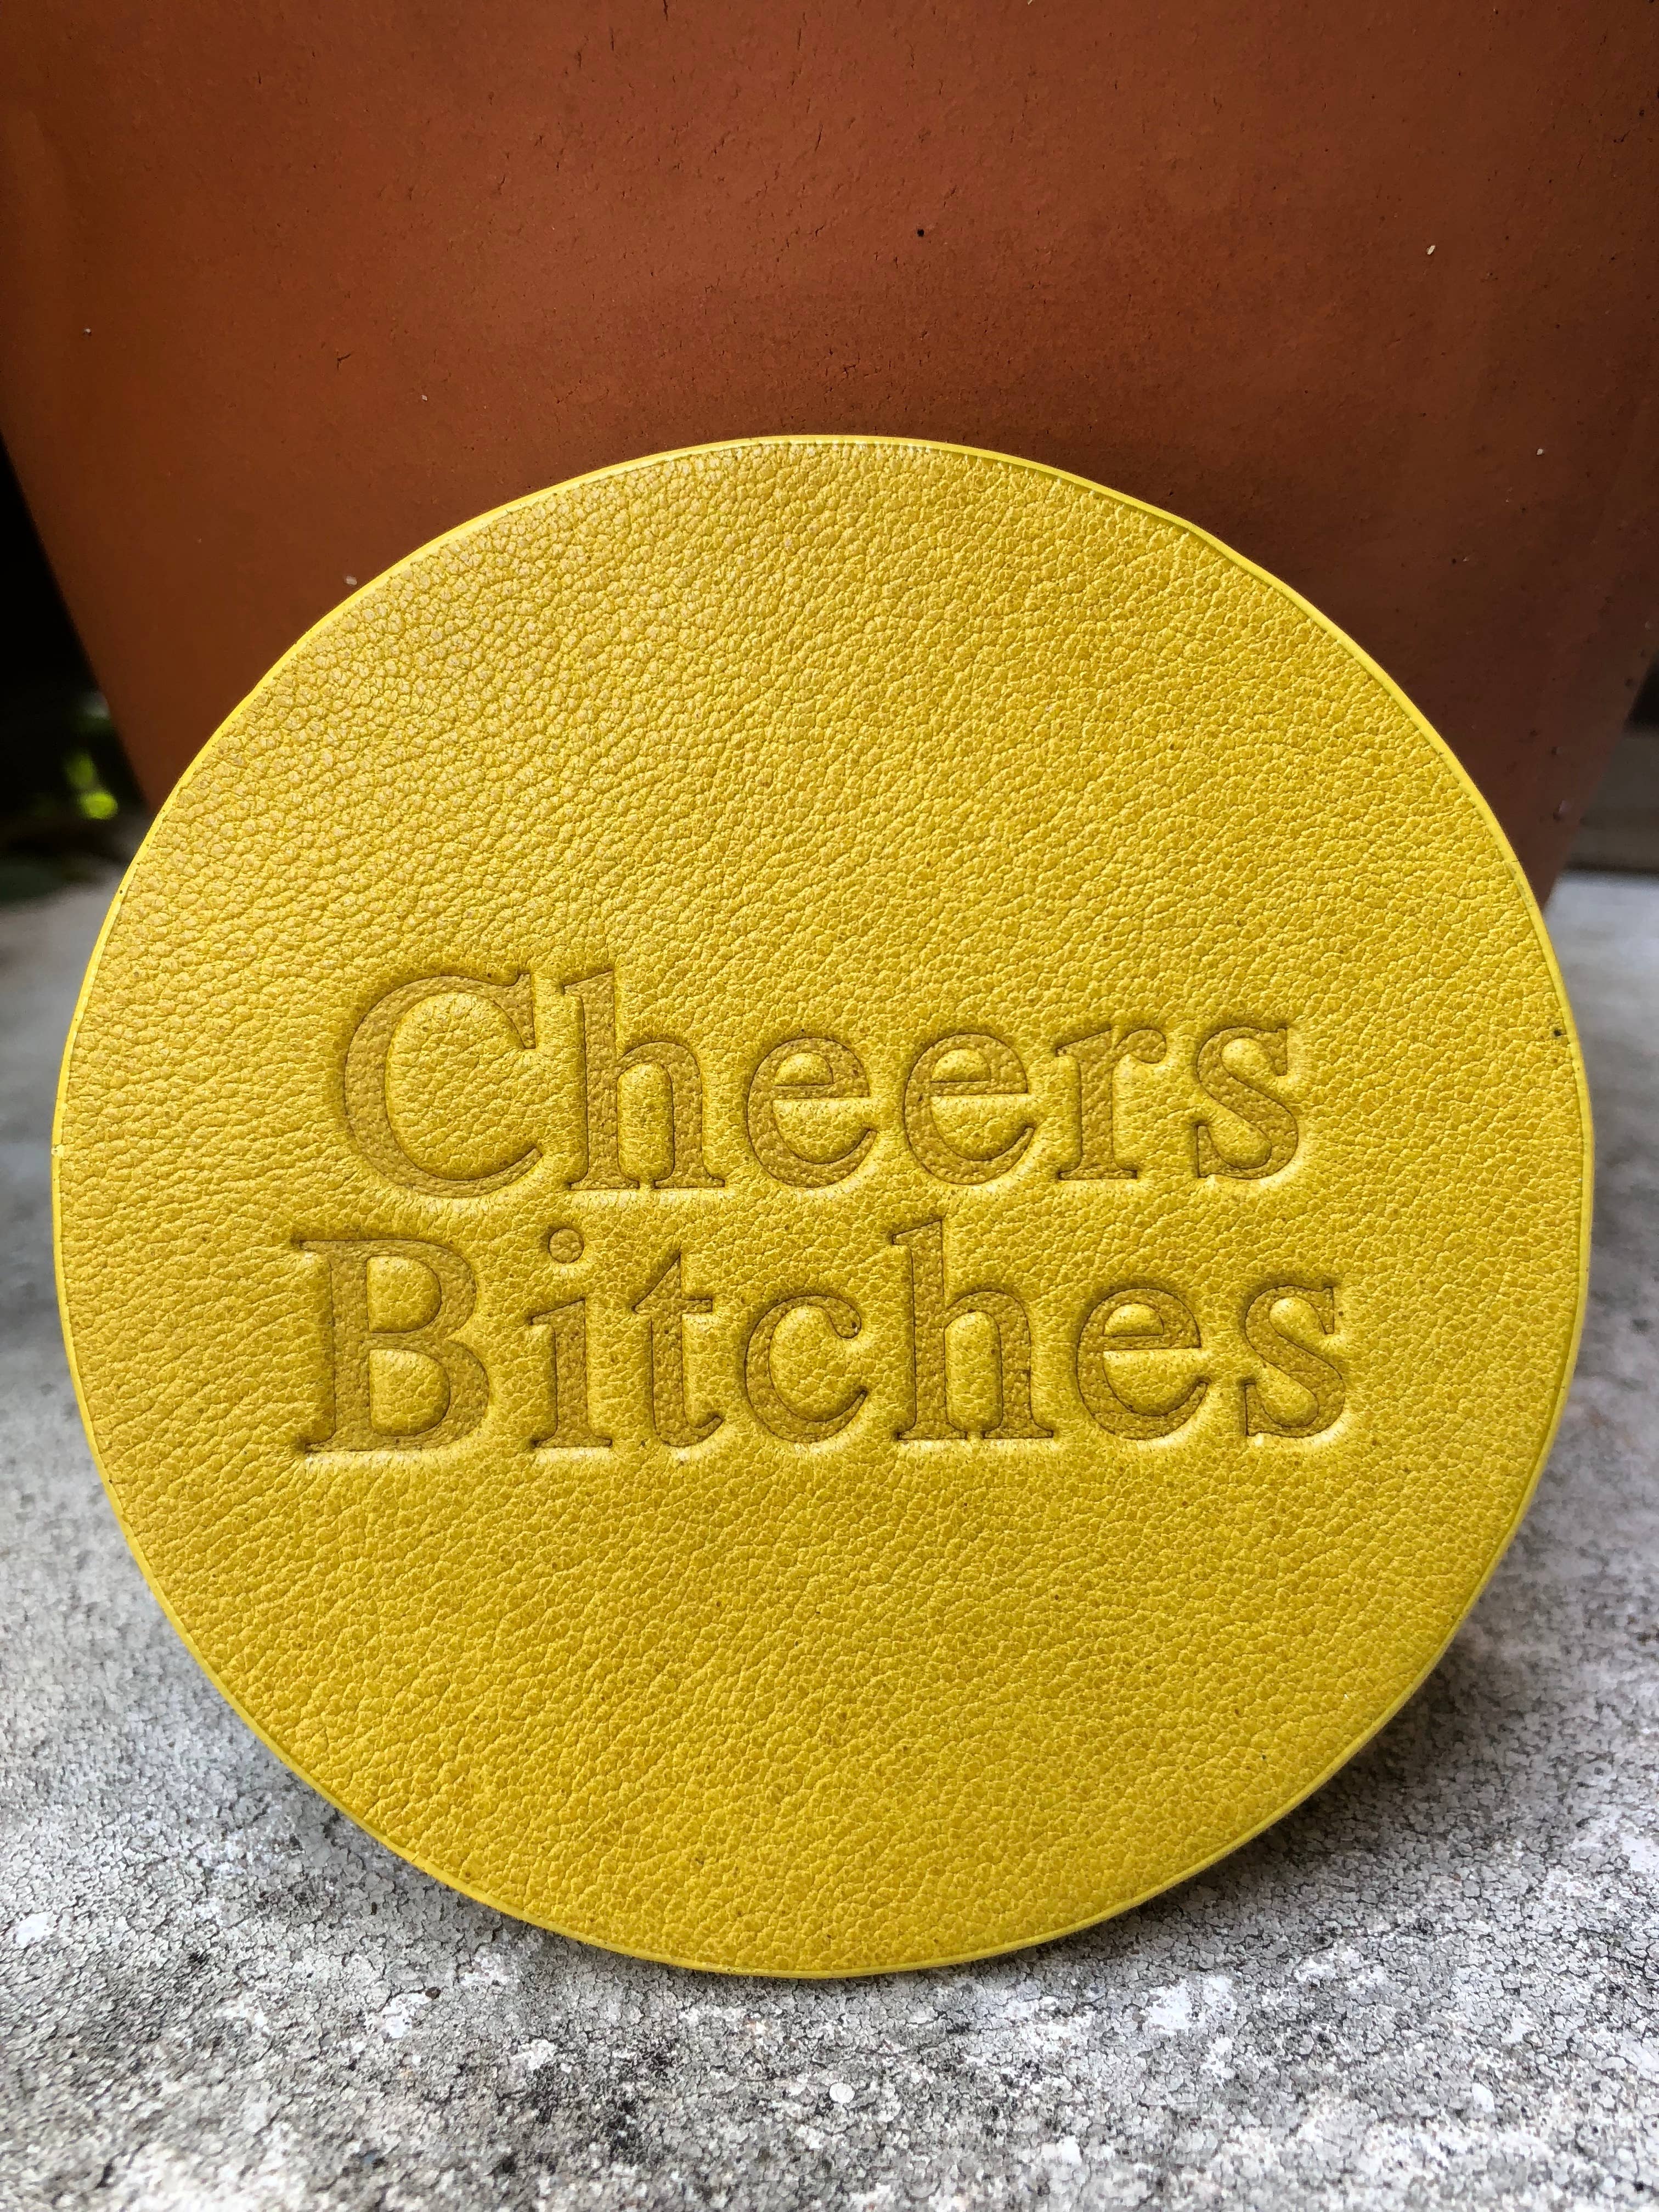 Cheers Bitches Leather Coaster